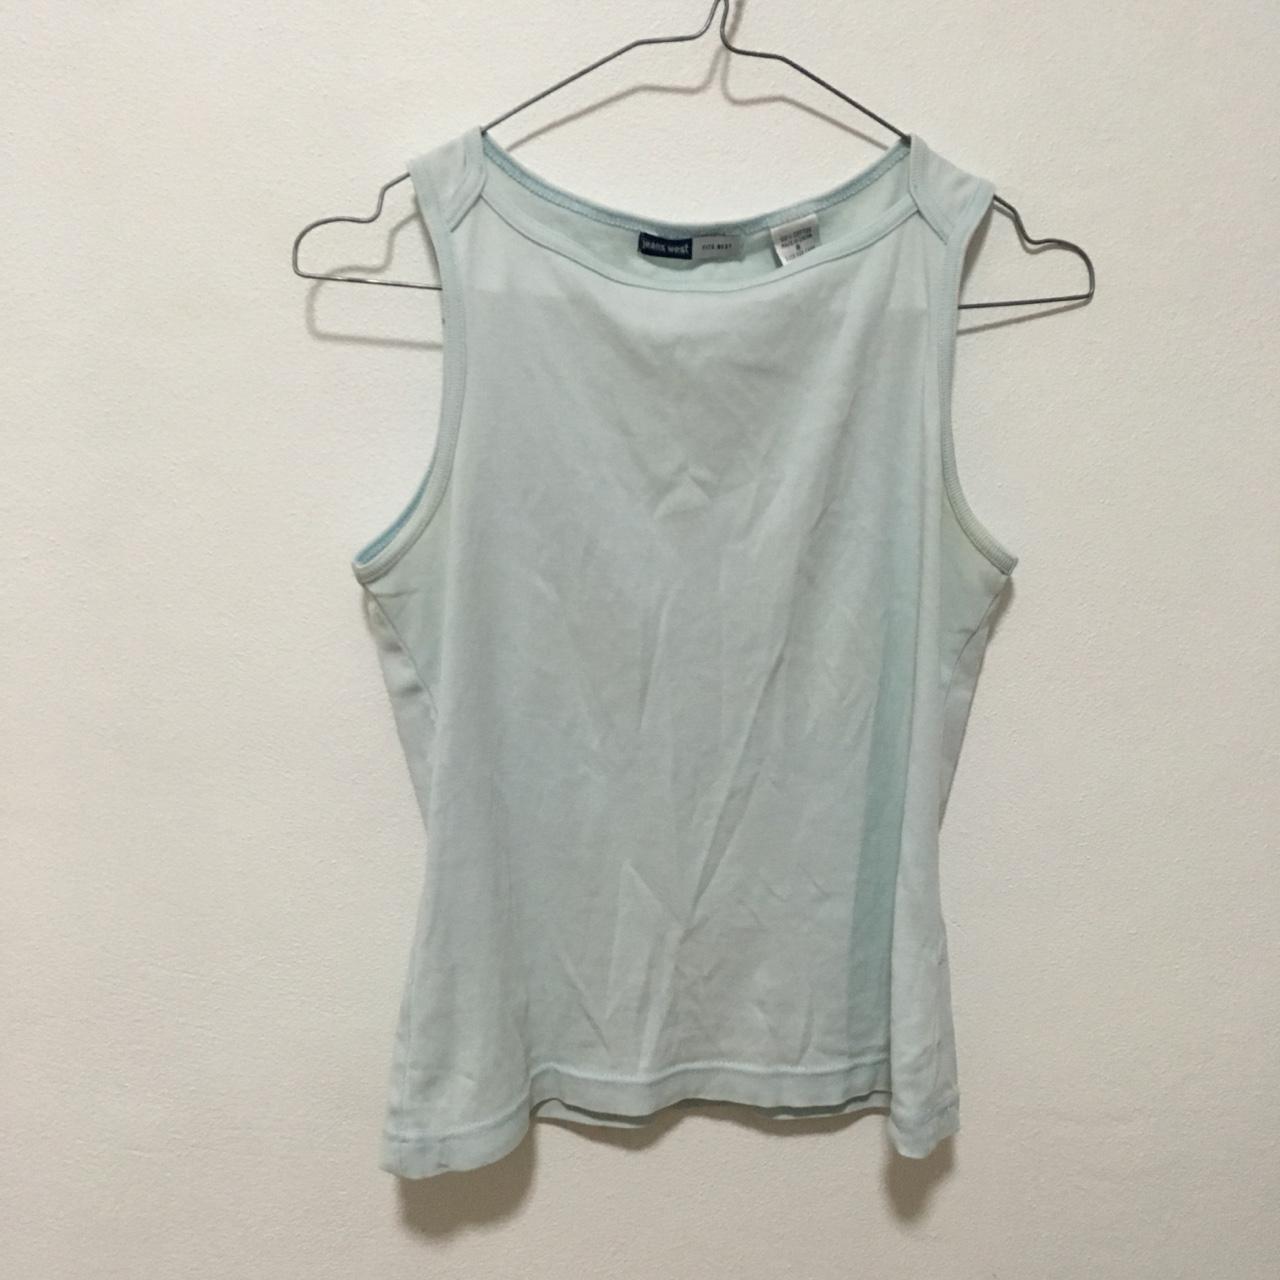 90s jeans west, high neck singlets These shirts are... - Depop